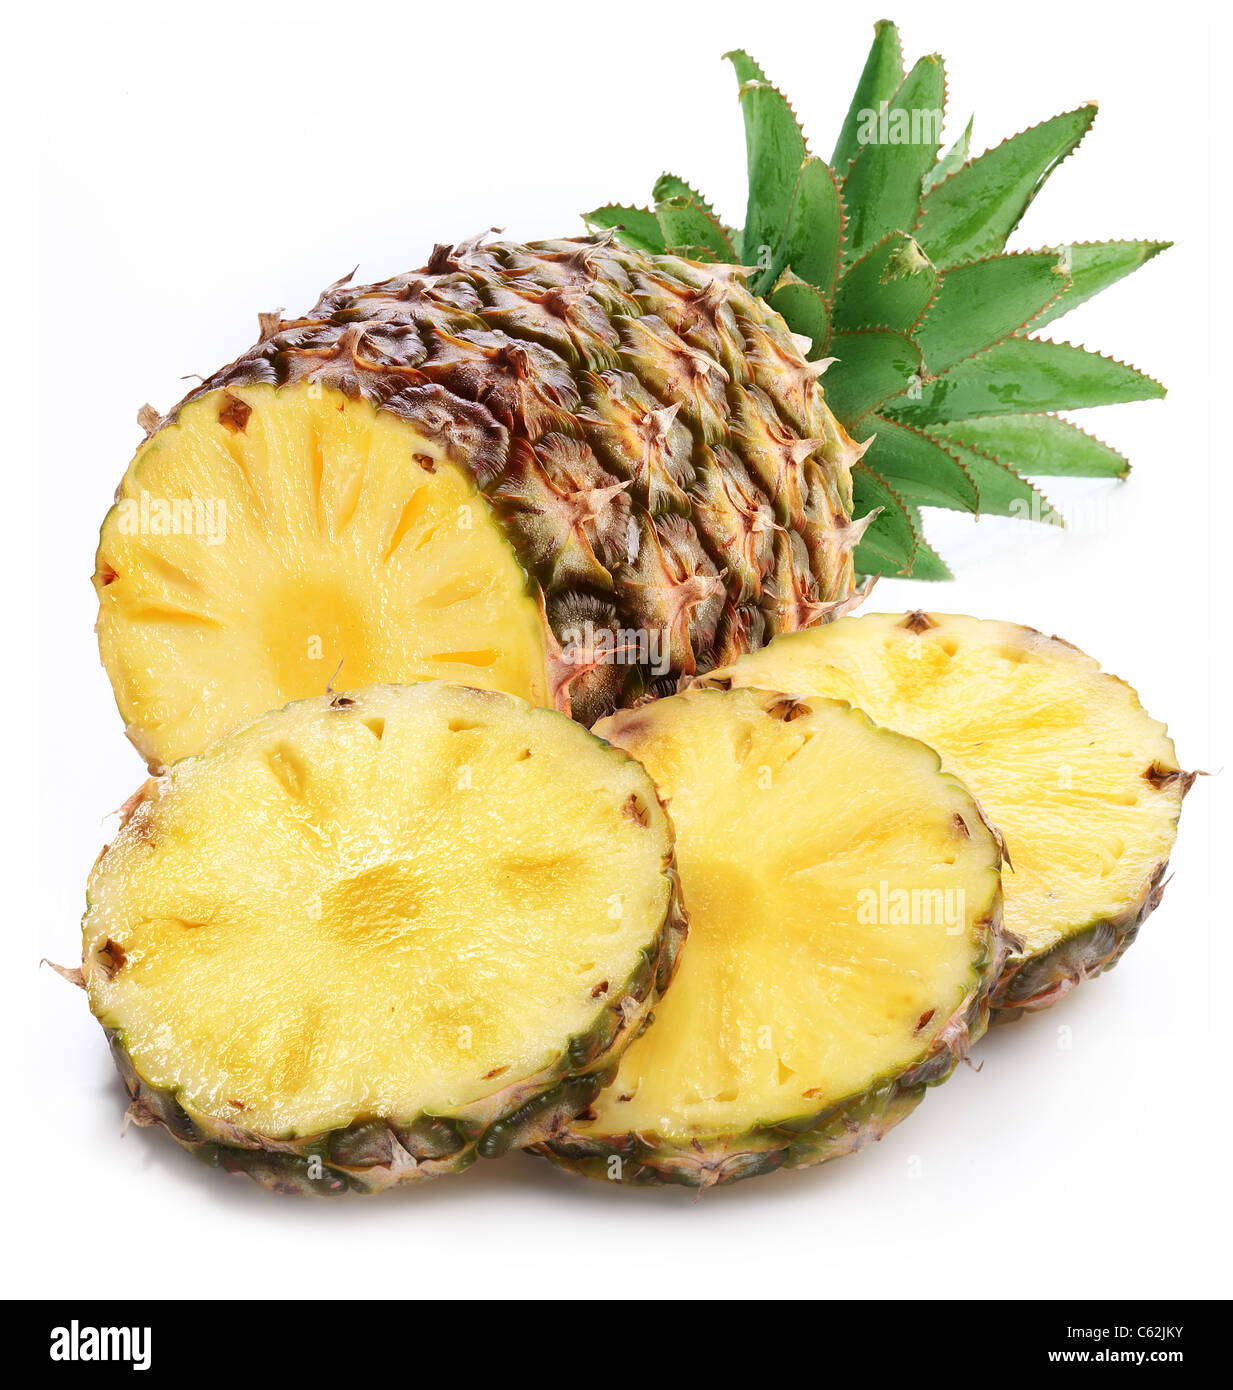 Pineapple slices with a white background. Stock Photo